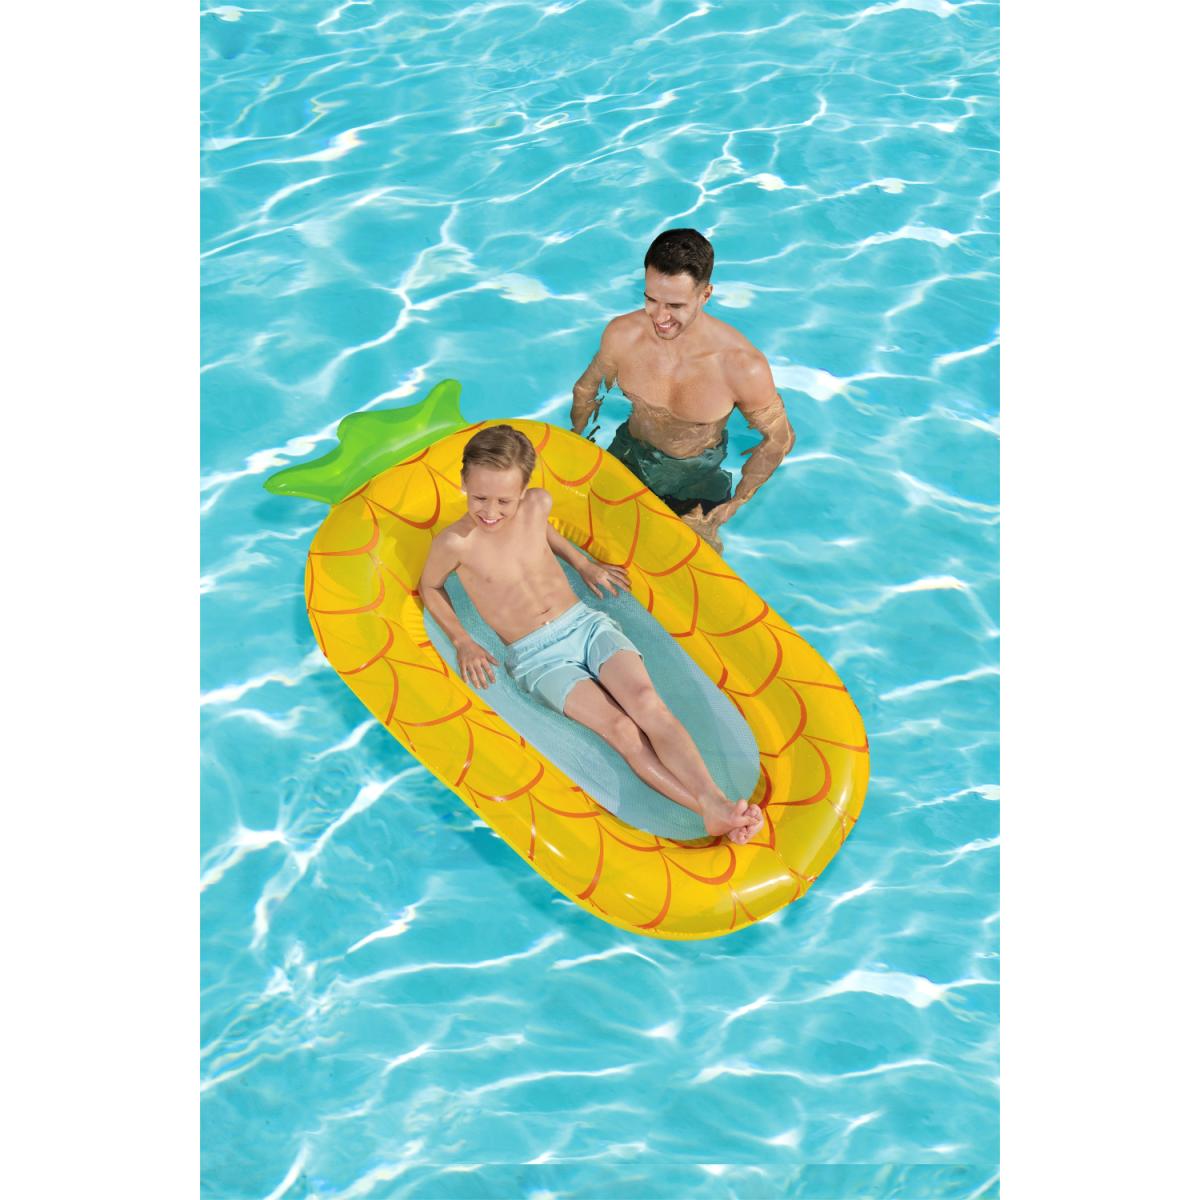 FLOTADOR INFLABLE TIPO LOUNGE